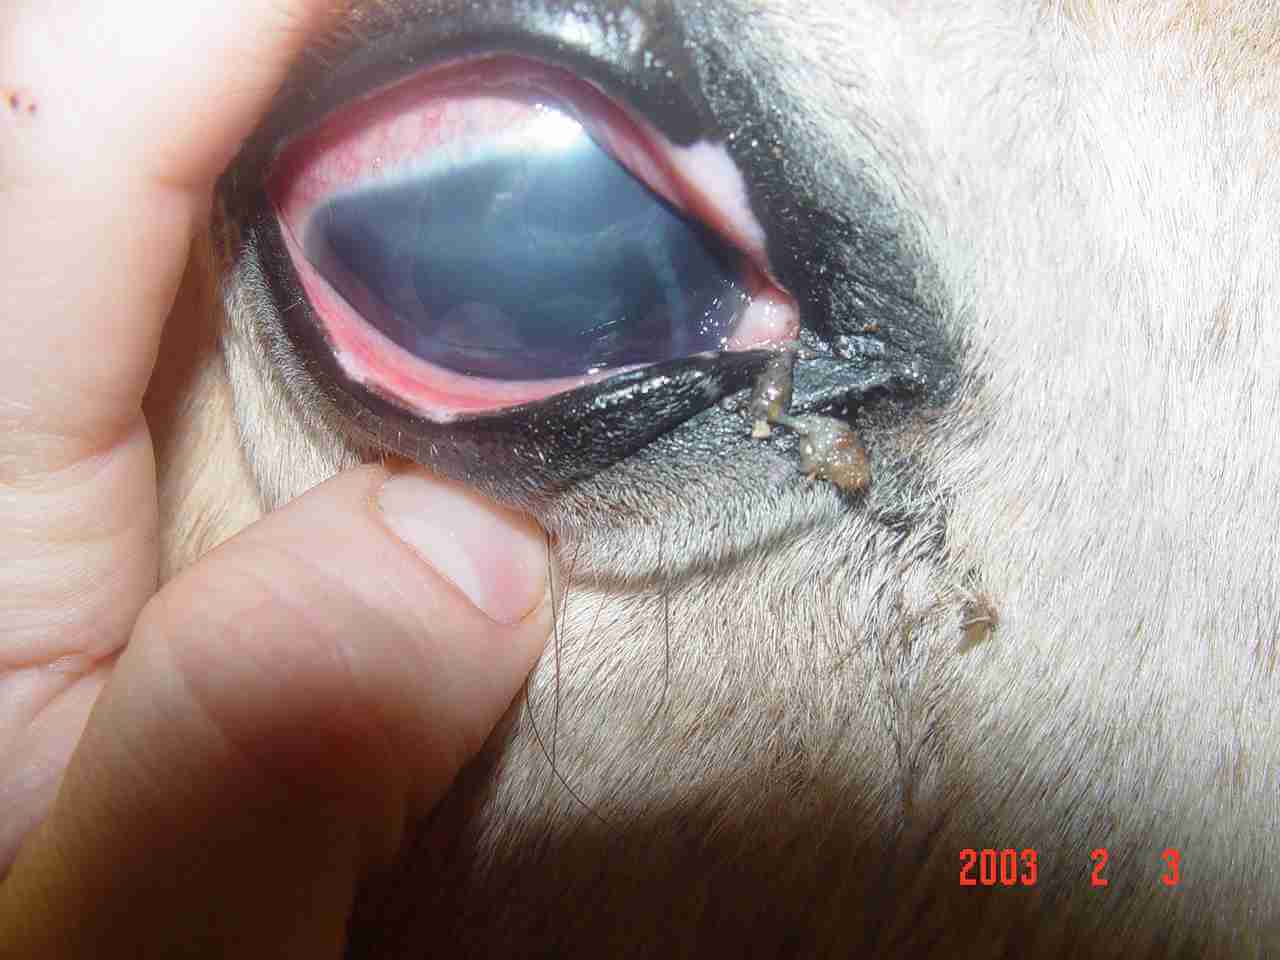 Eye Infections in Horses  